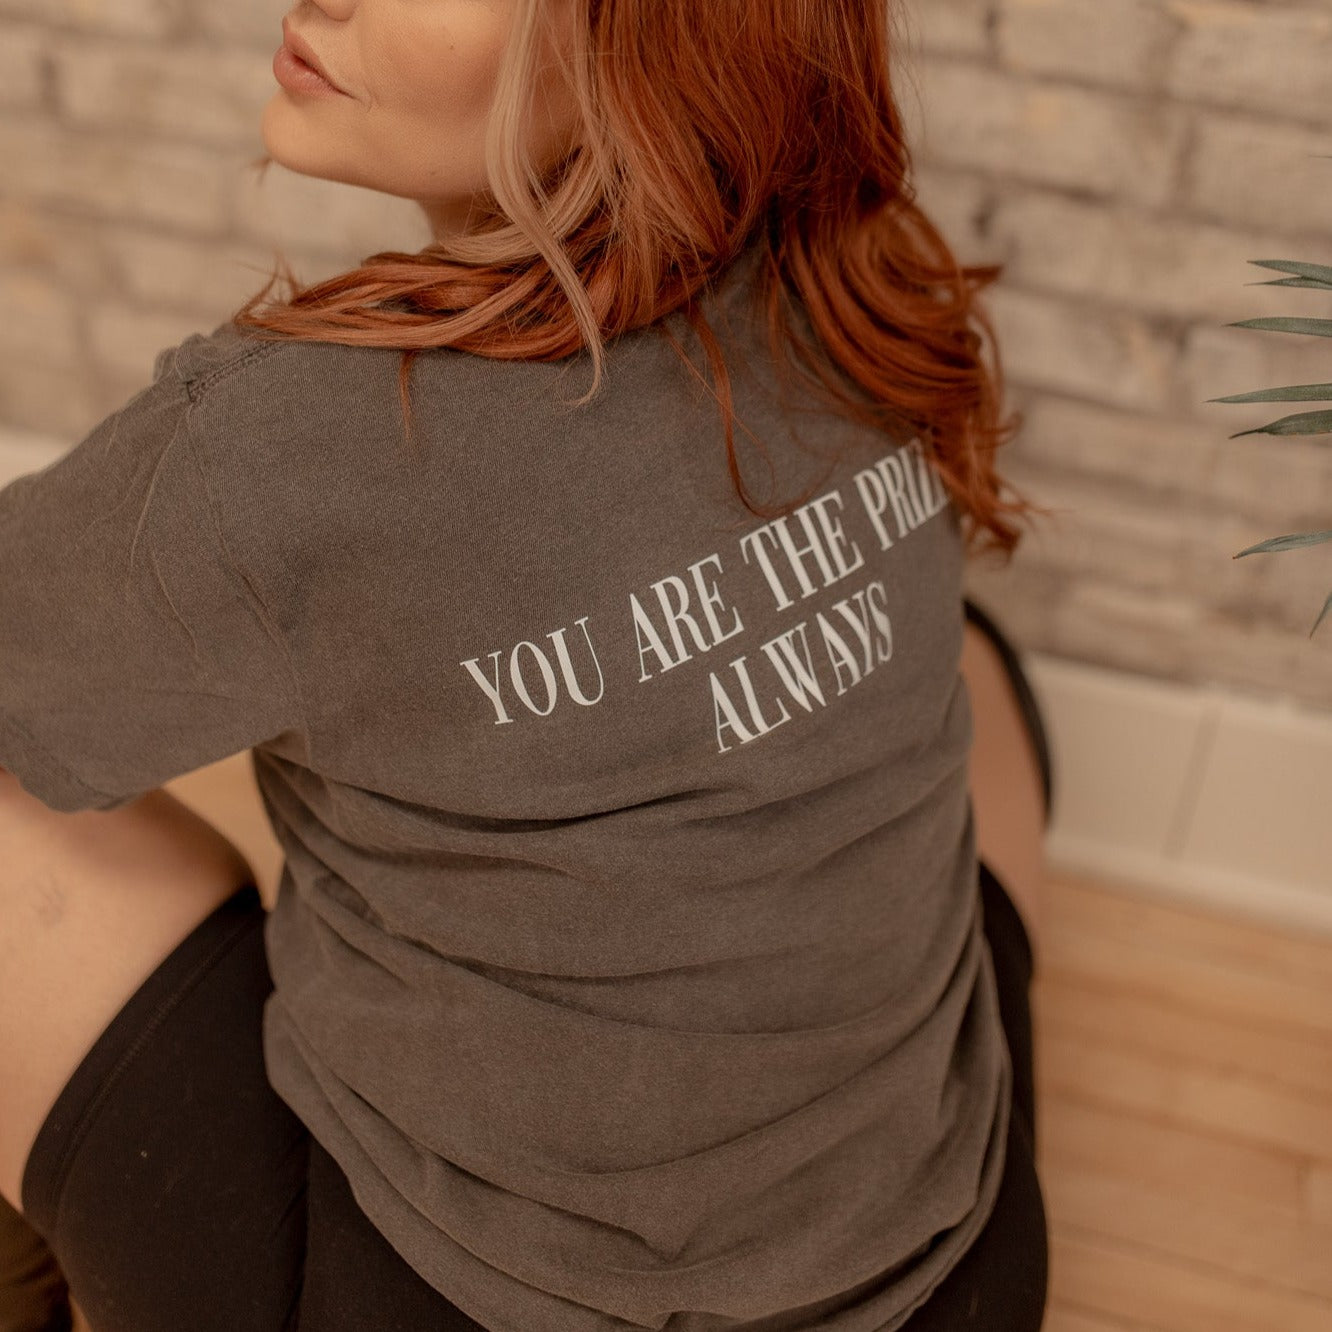 YOU ARE THE PRIZE TSHIRT